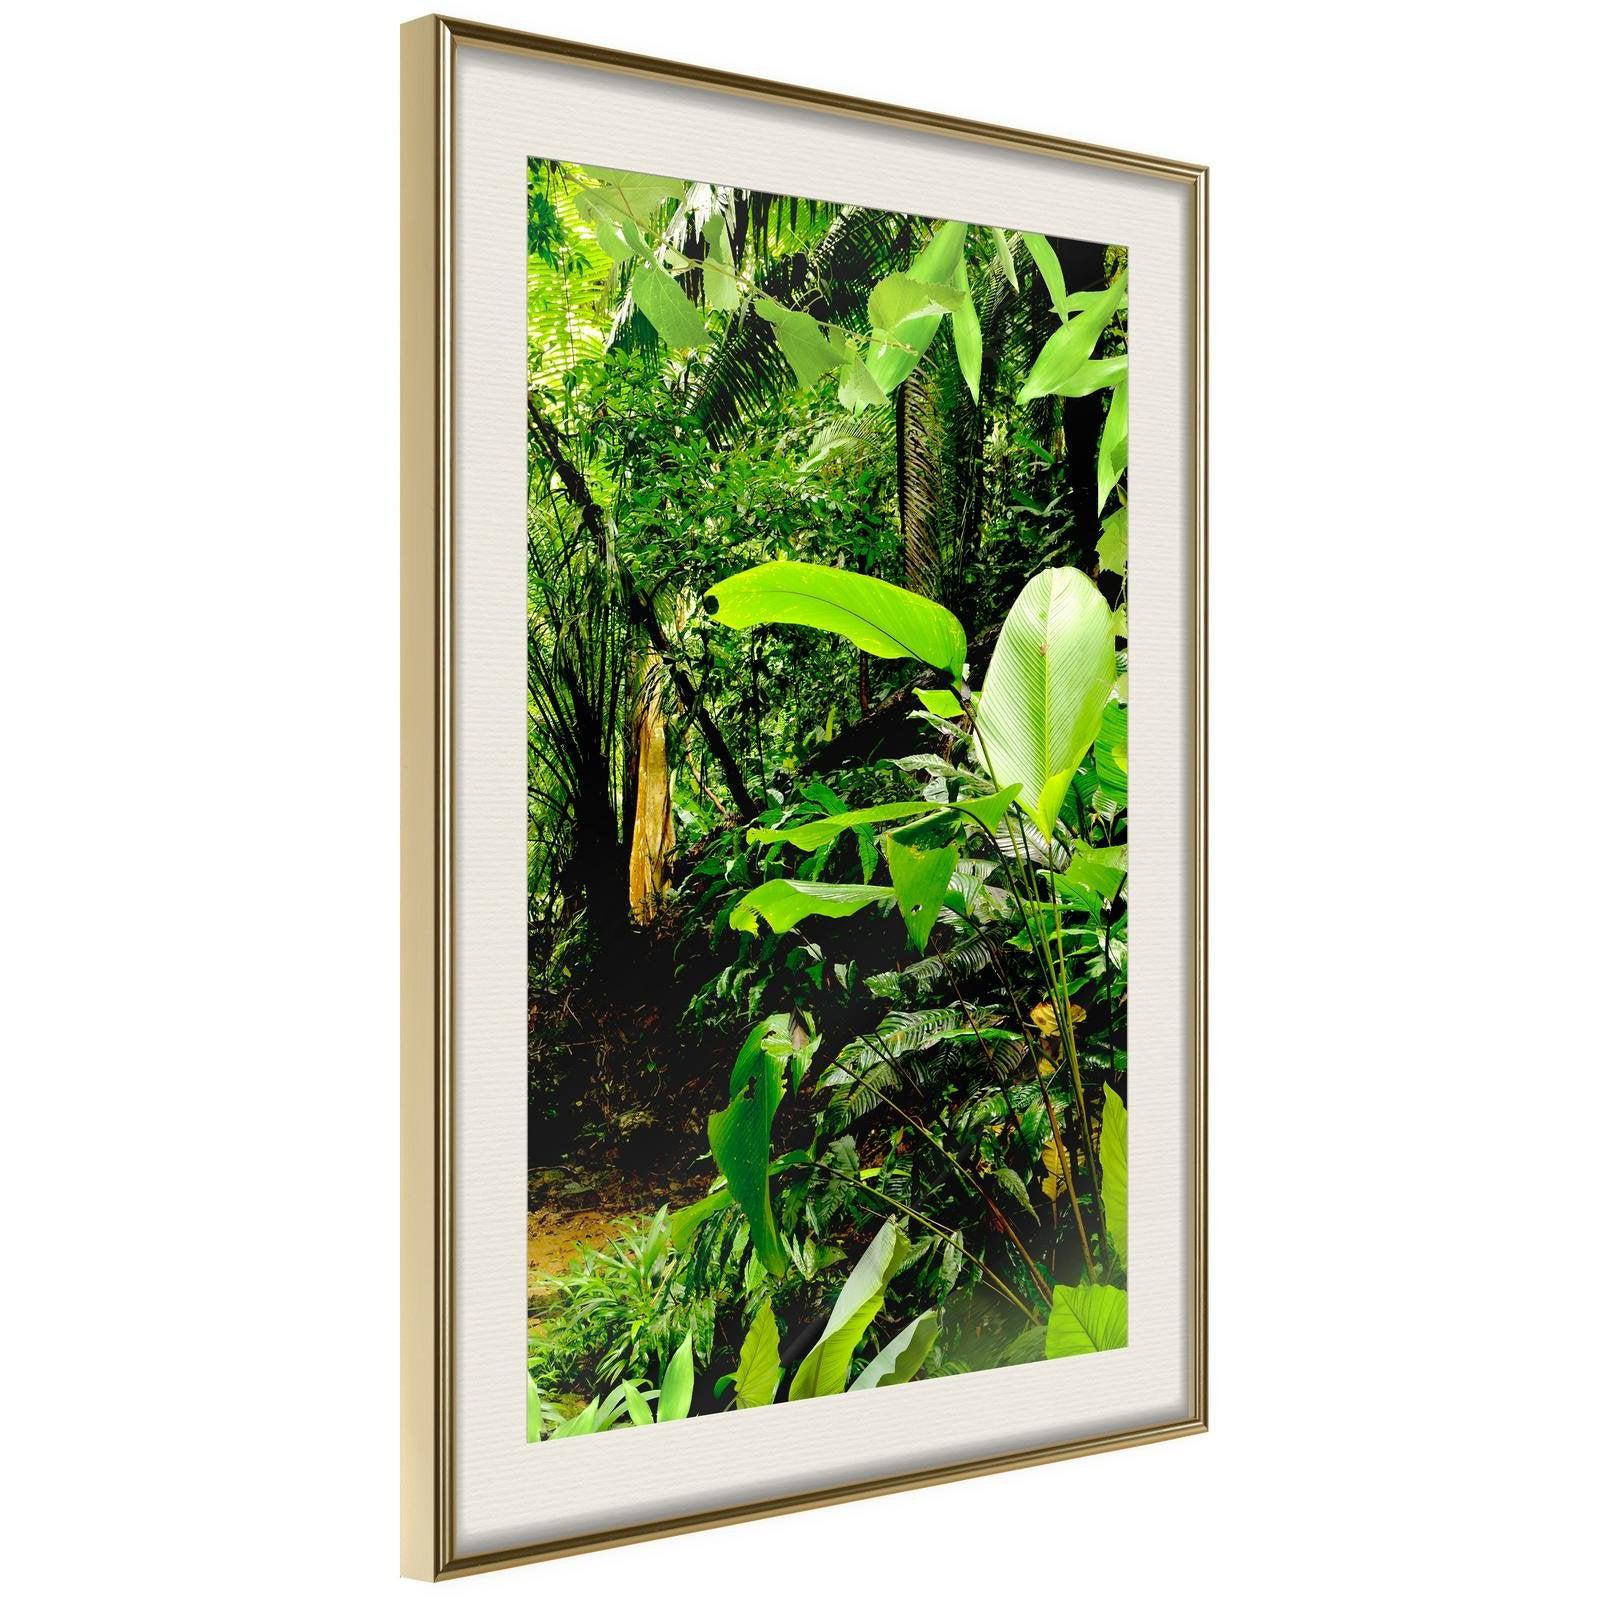 Inramad Poster / Tavla - In the Rainforest-Poster Inramad-Artgeist-20x30-Guldram med passepartout-peaceofhome.se